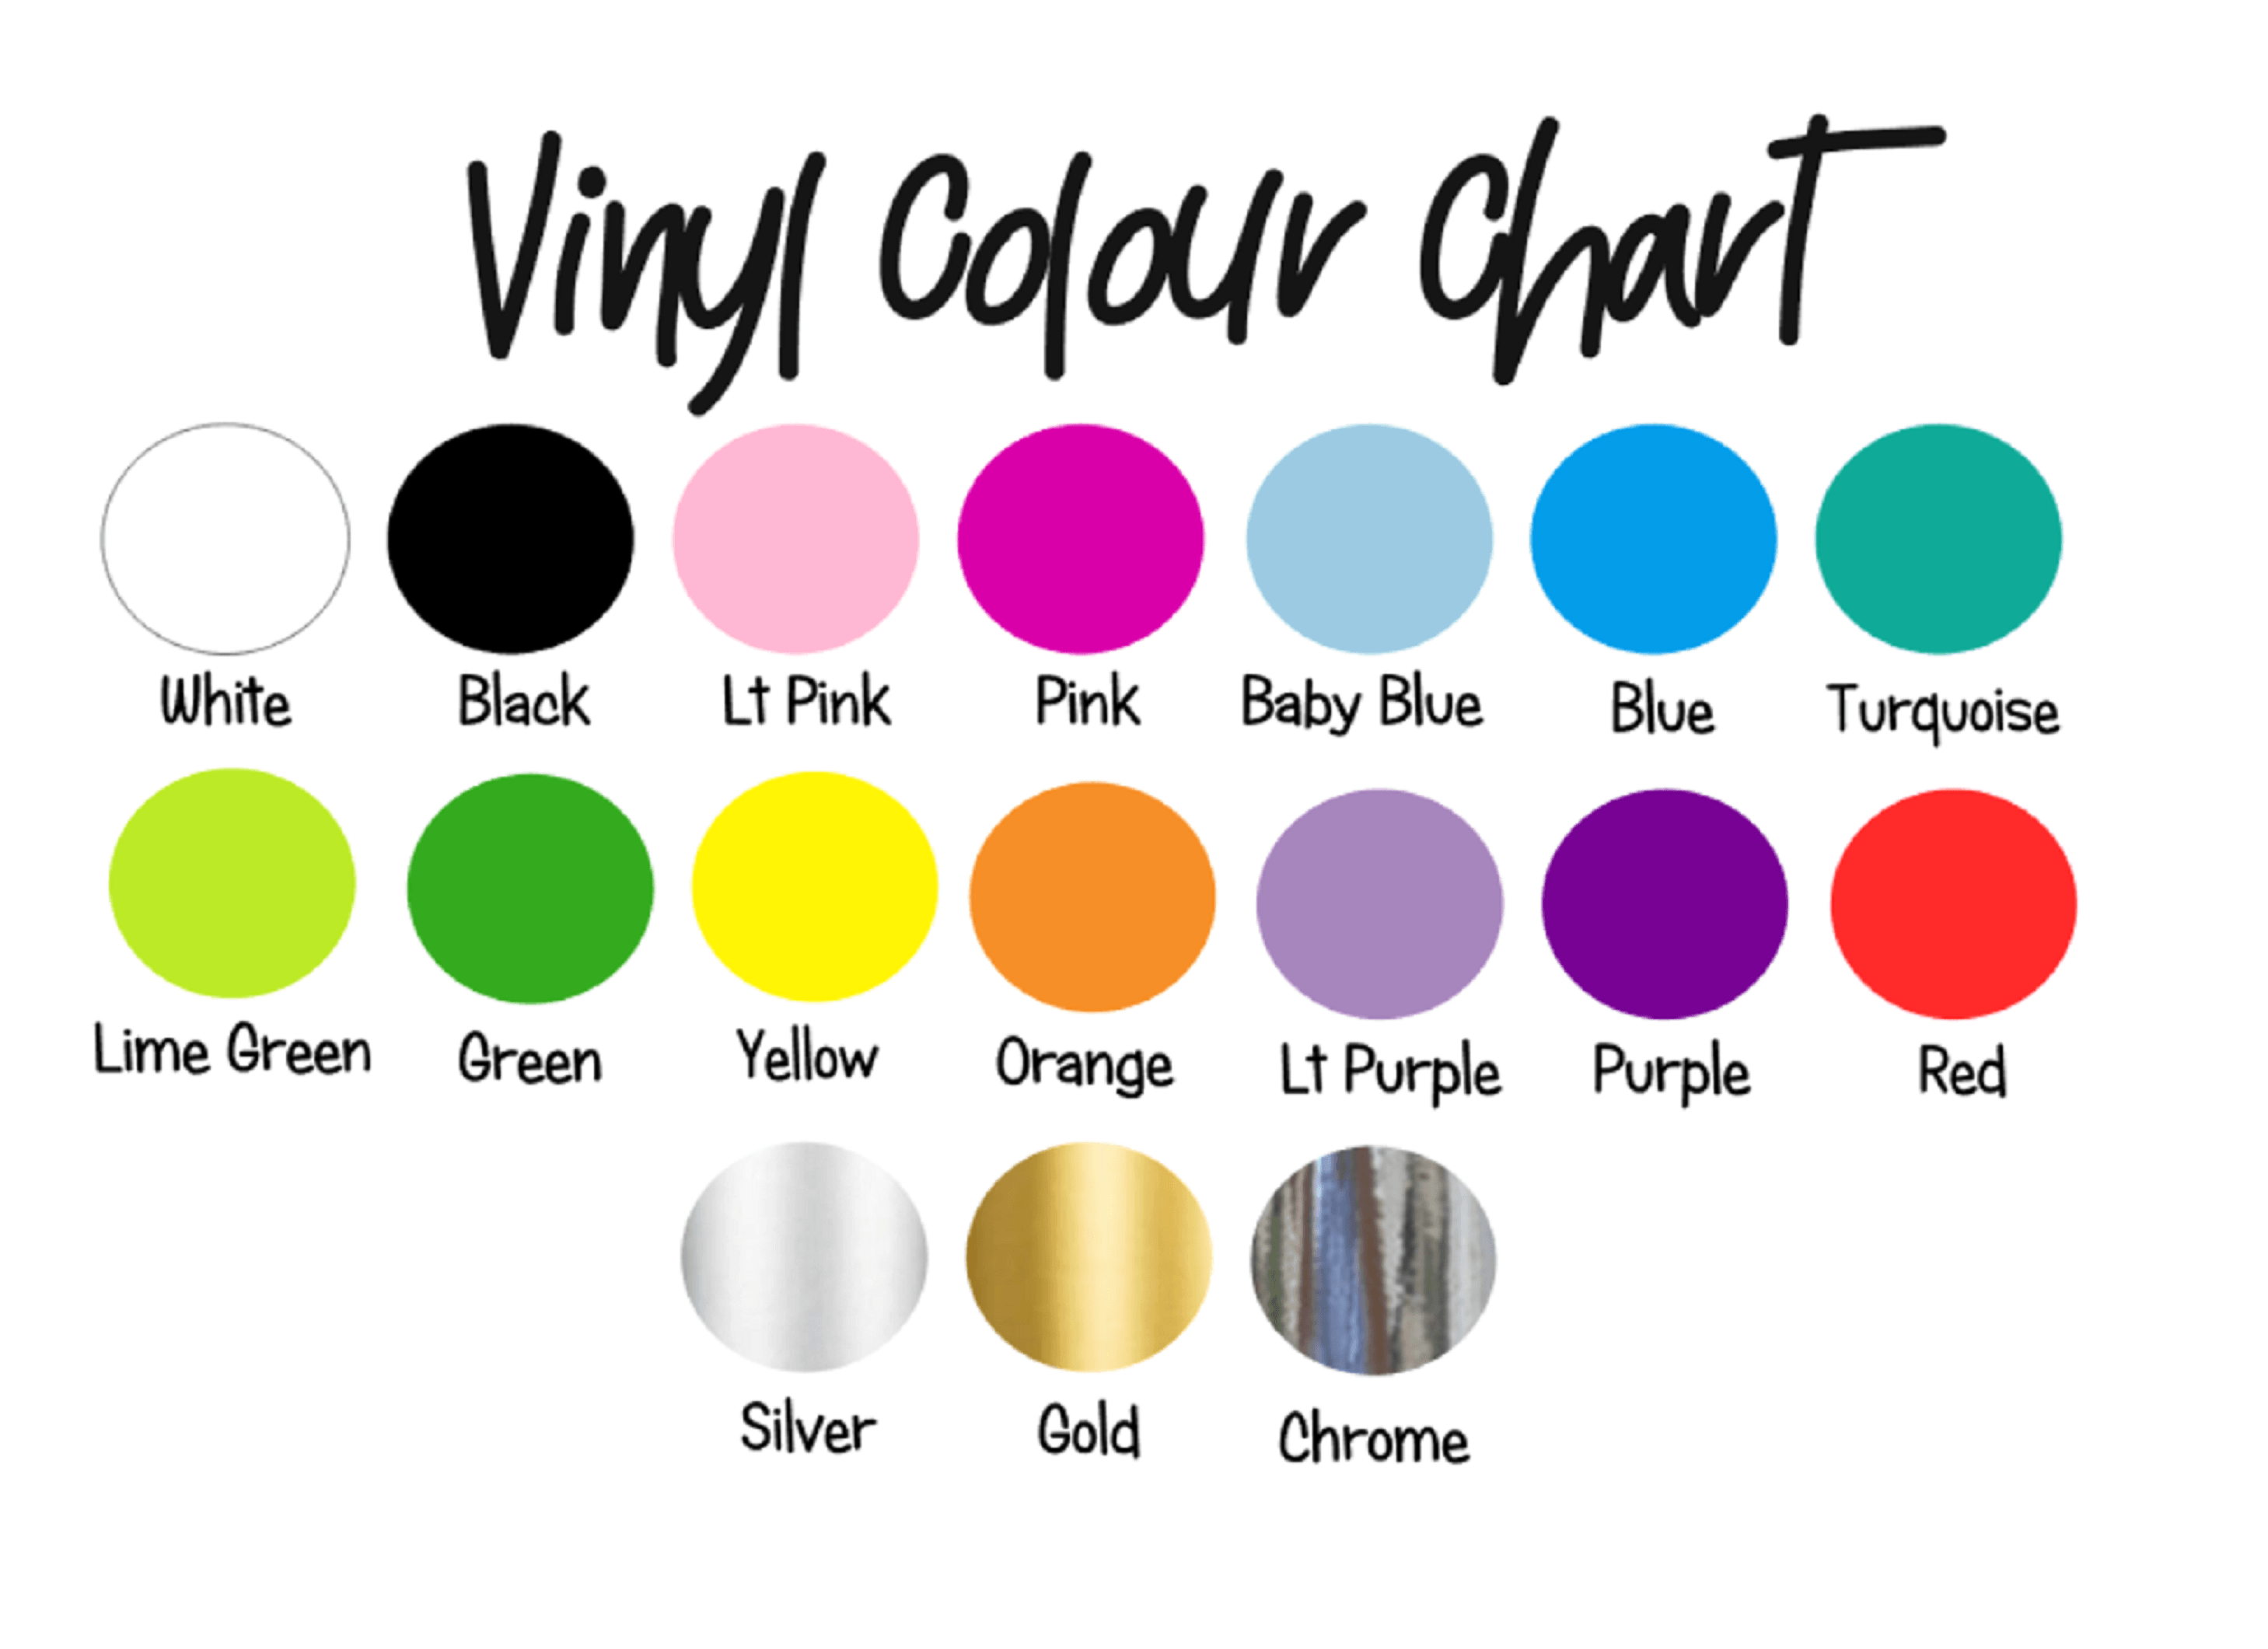 Vinyl Colour chart for German Shepherd Decal Plain or Add Name/Text - My Crafty Dog